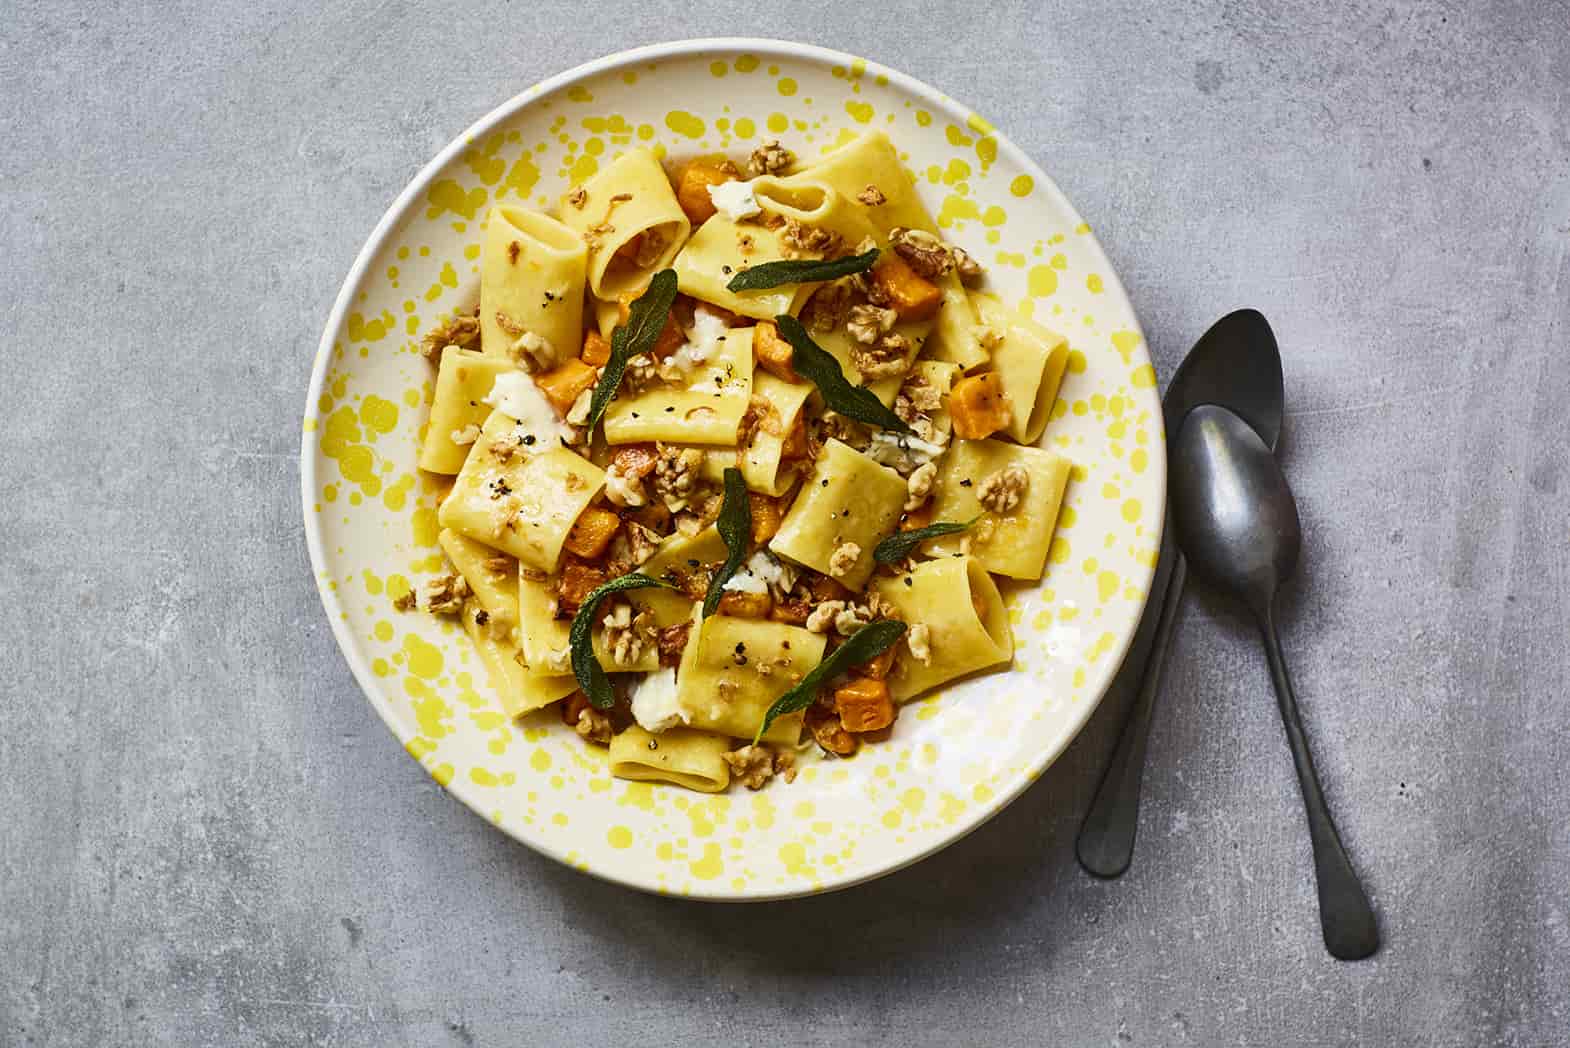 Pumpkin pasta recipe with sage and truffle oil